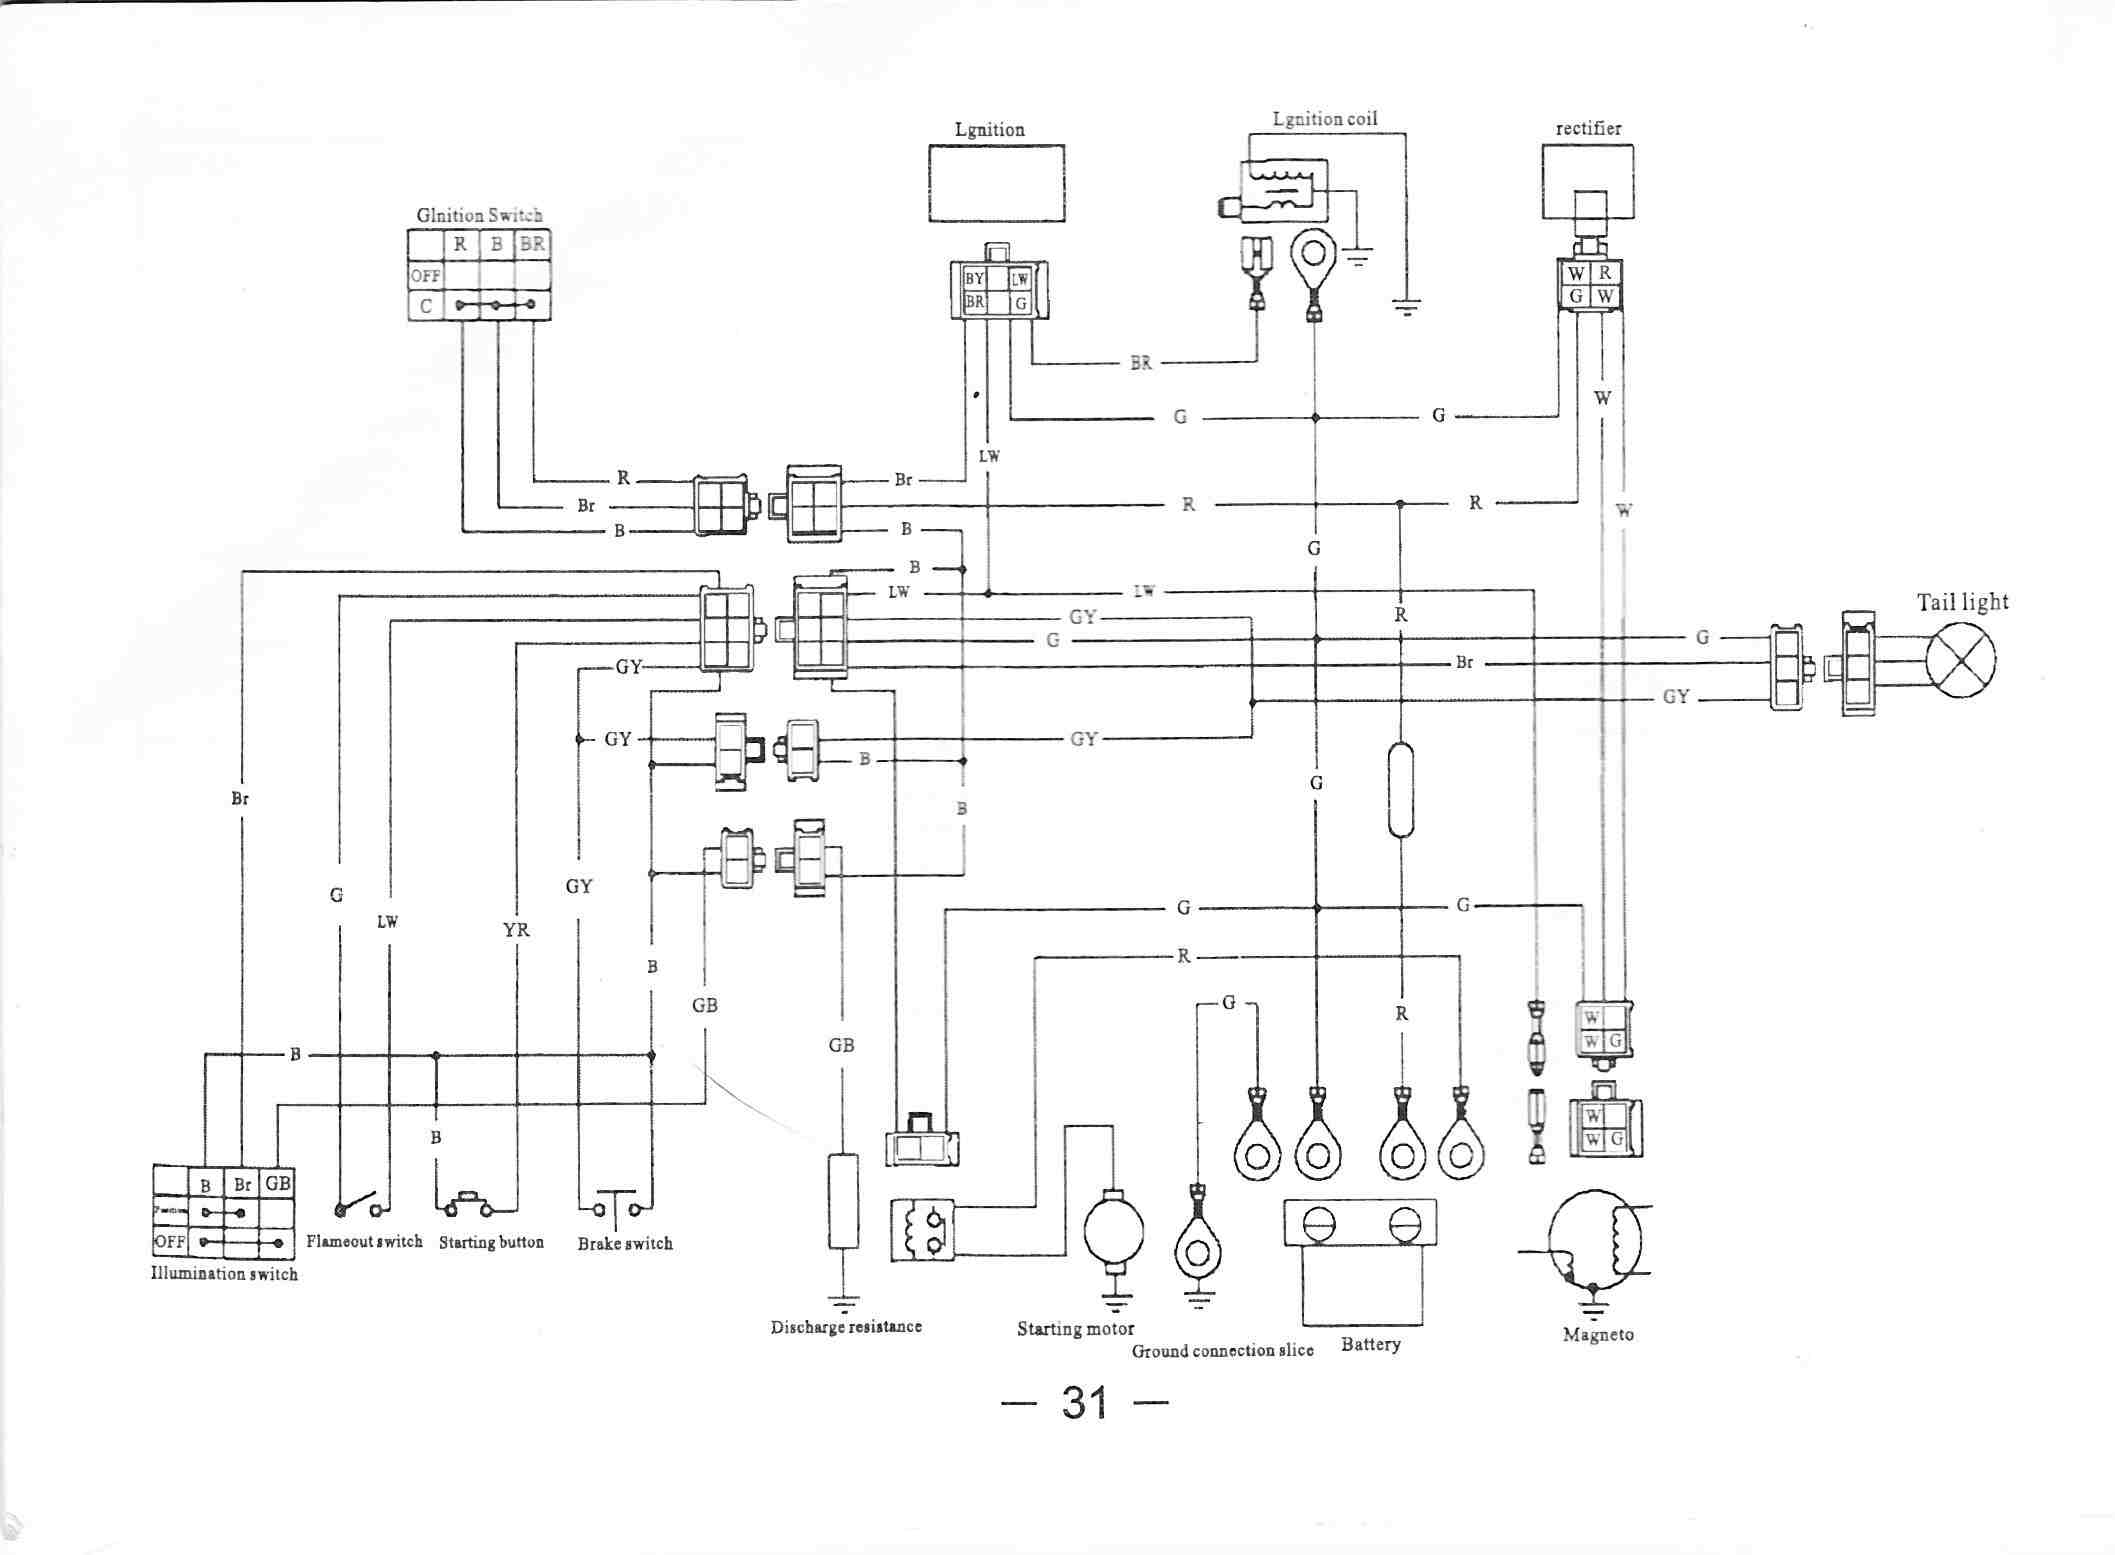 Yamoto 70cc wiring diagram posted below - ATVConnection.com ATV Enthusiast  Community  Loncin E22 Wiring Diagram Electric Start With Lights    ATV Connection